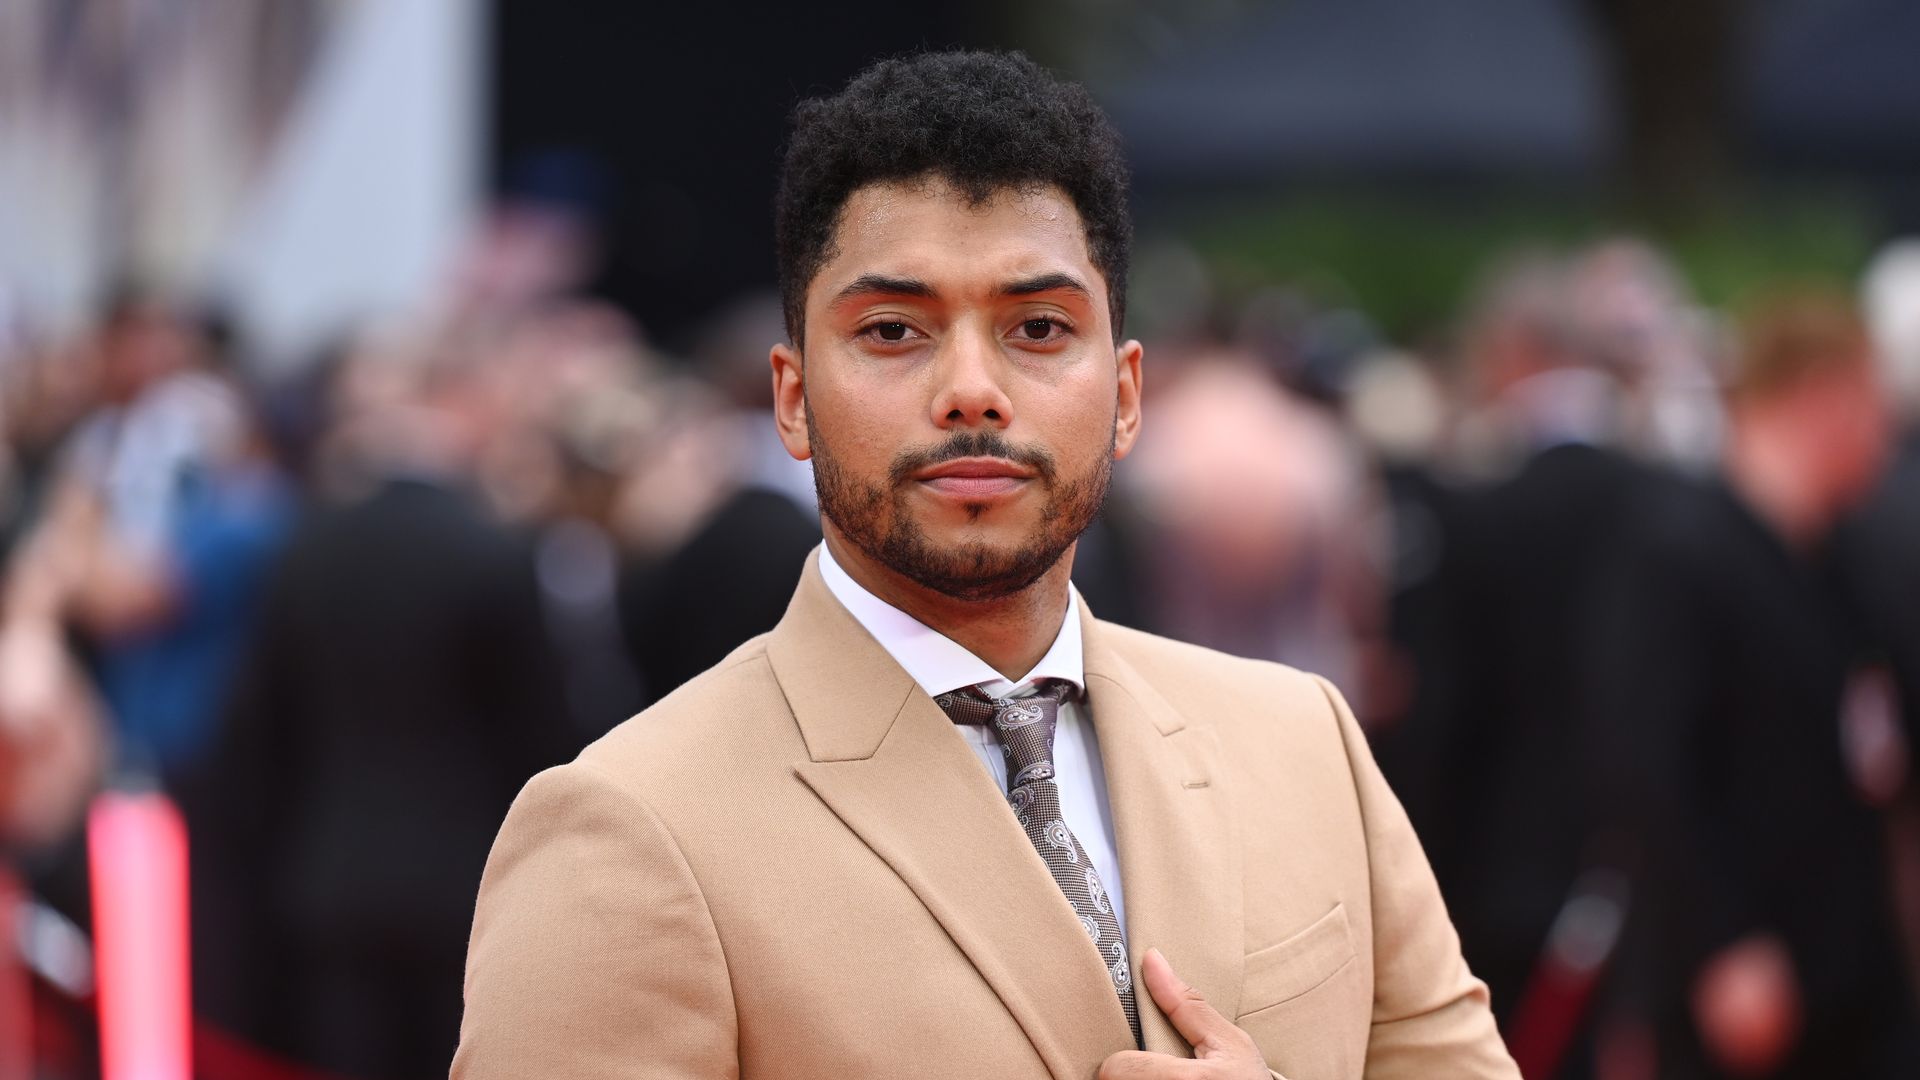 Chance Perdomo attends the "Mission: Impossible - Dead Reckoning Part One" UK Premiere at Odeon Luxe Leicester Square on June 22, 2023 